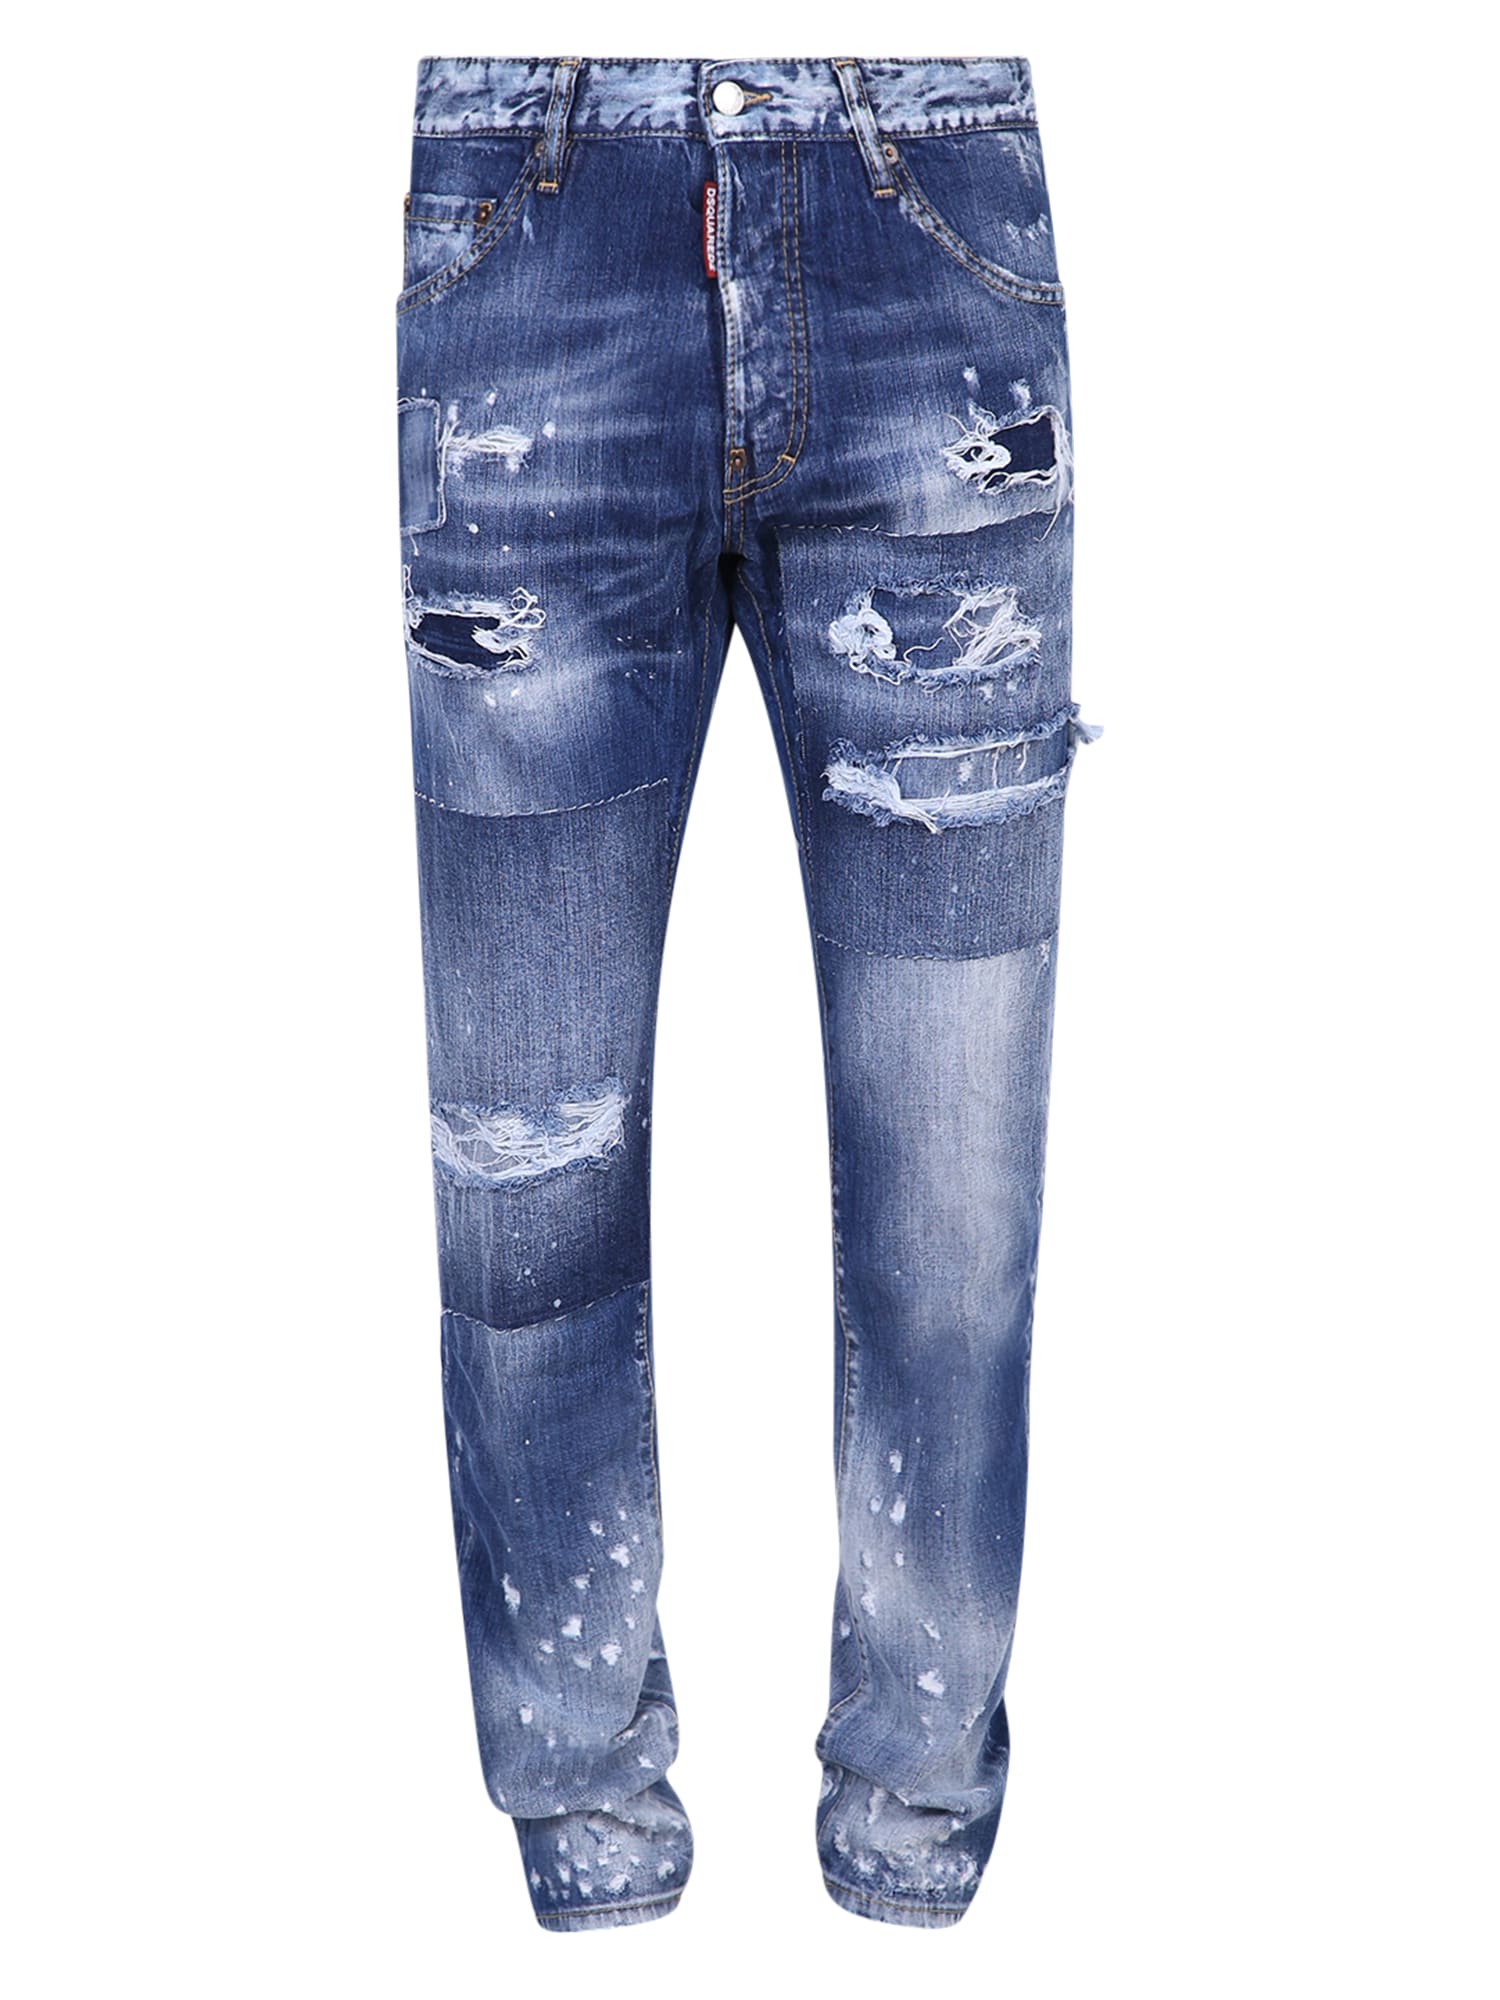 DSQUARED2 COOL GUY JEANS,S71LB0914 S30309 470